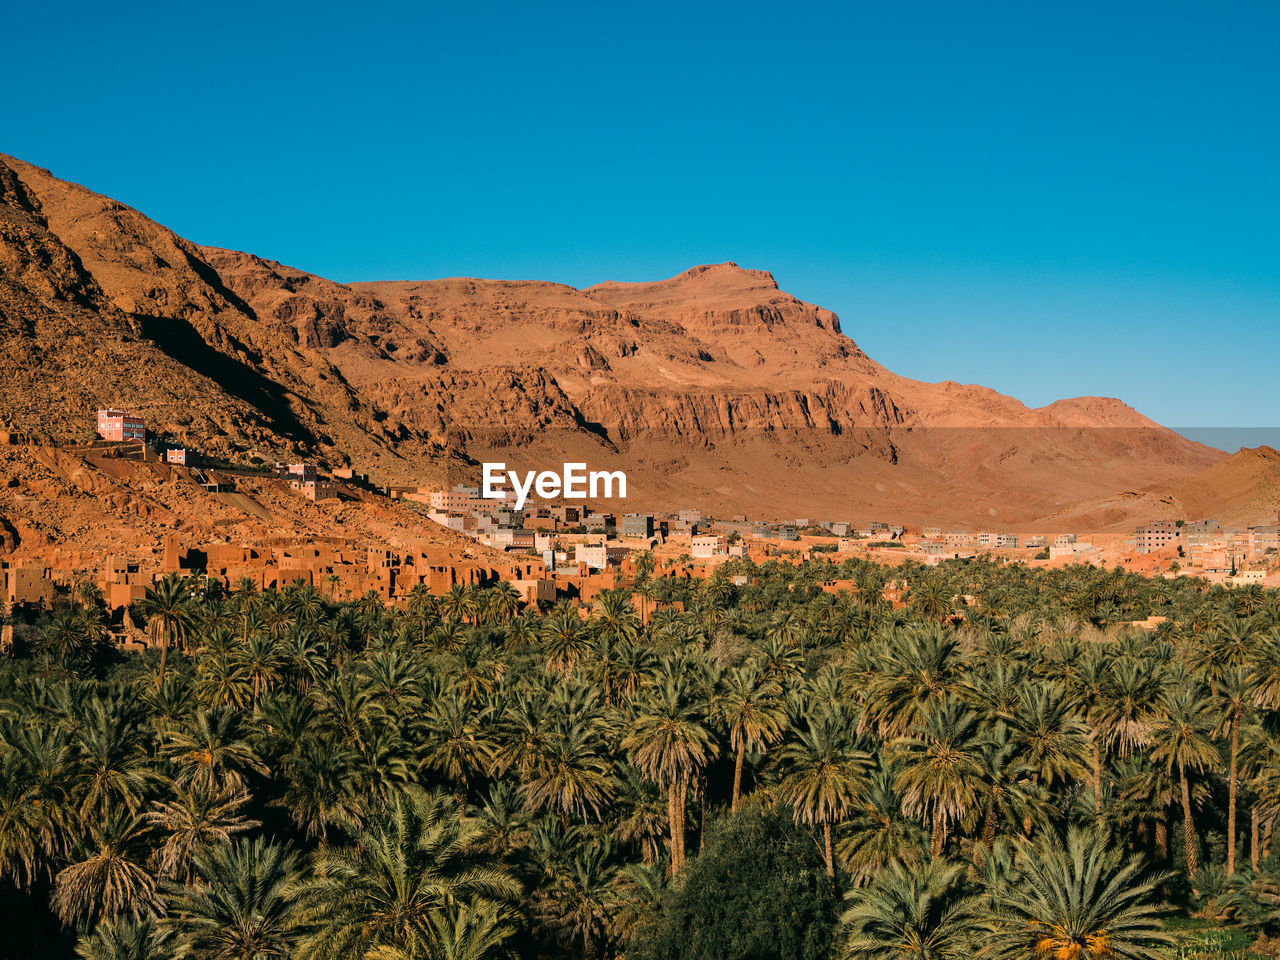 An arabic village in the mountains with a sea of palm trees in front